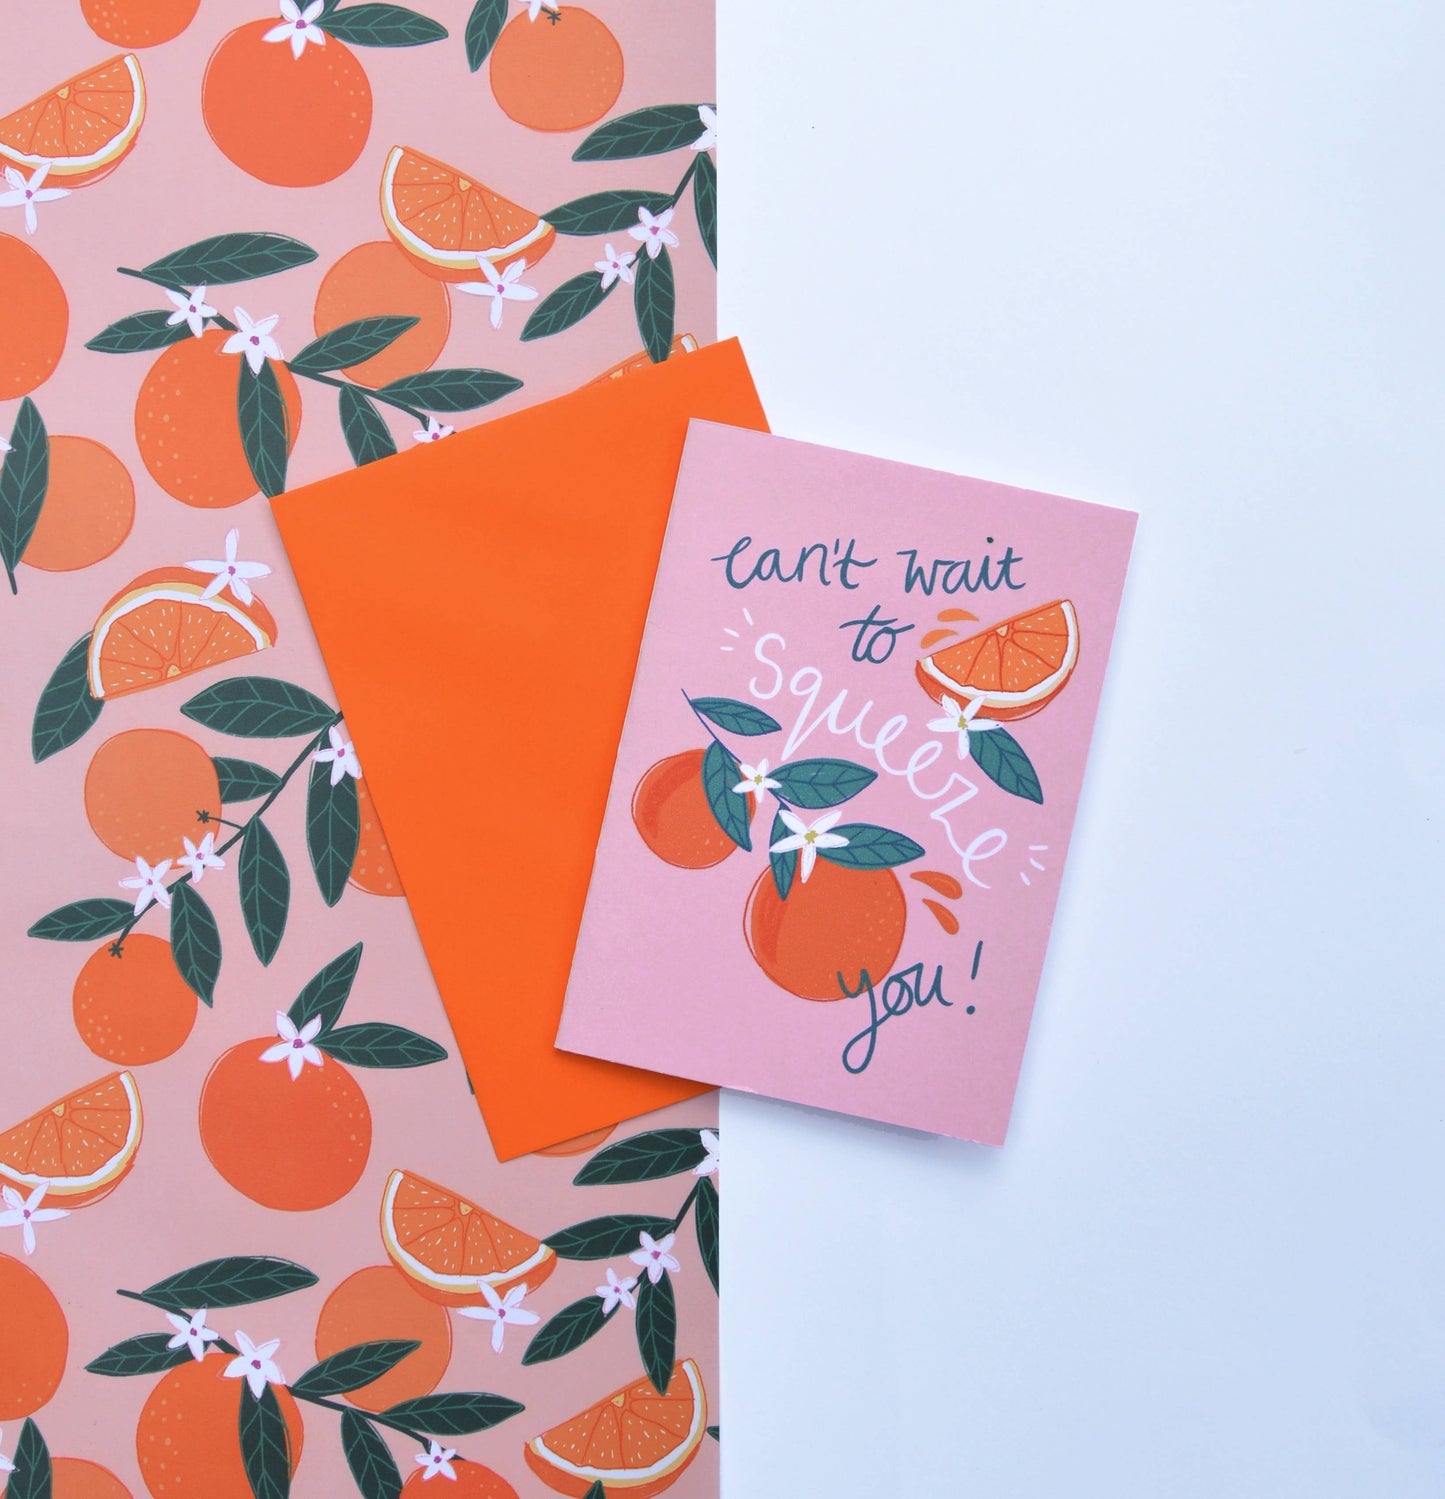 Wrapping paper and card with sevilla oranges on it 